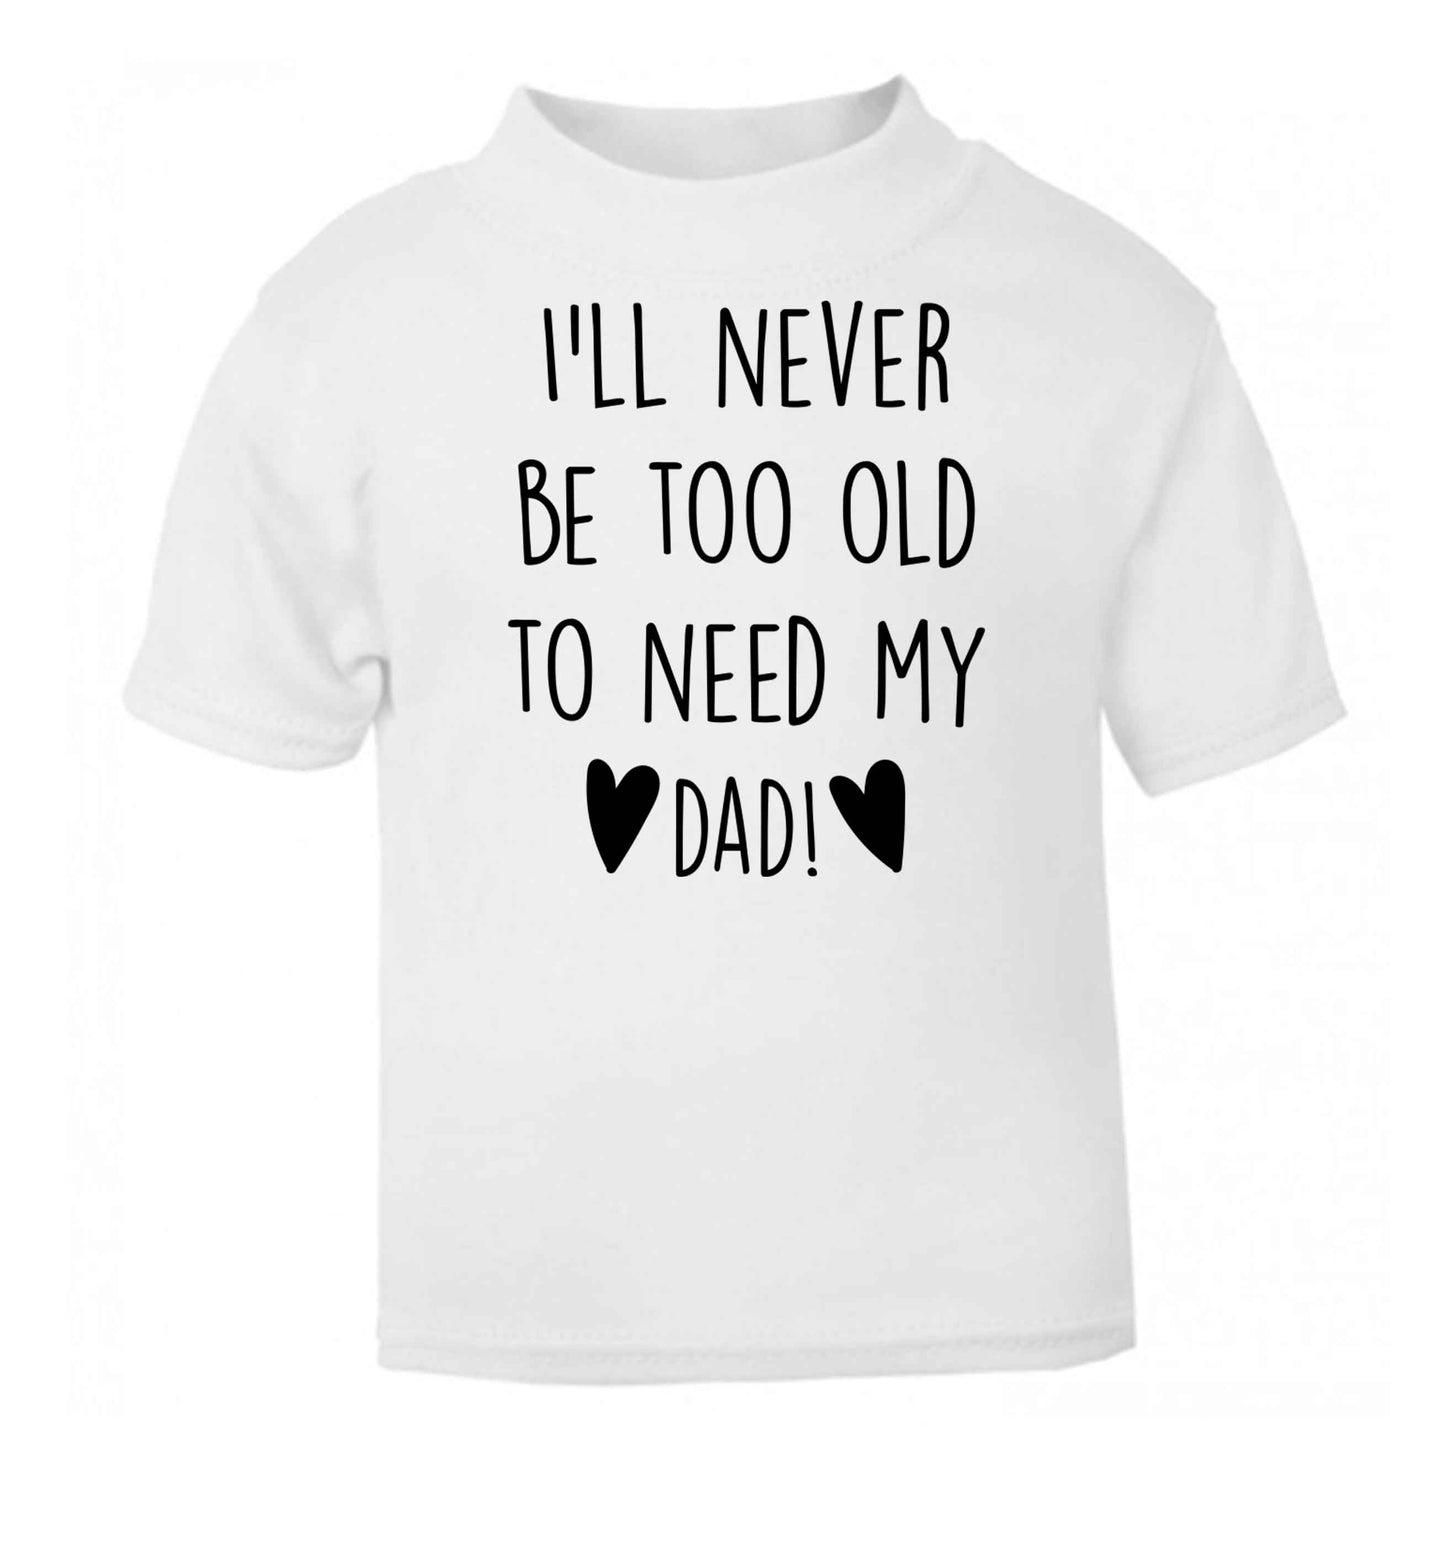 I'll never be too old to need my dad white baby toddler Tshirt 2 Years